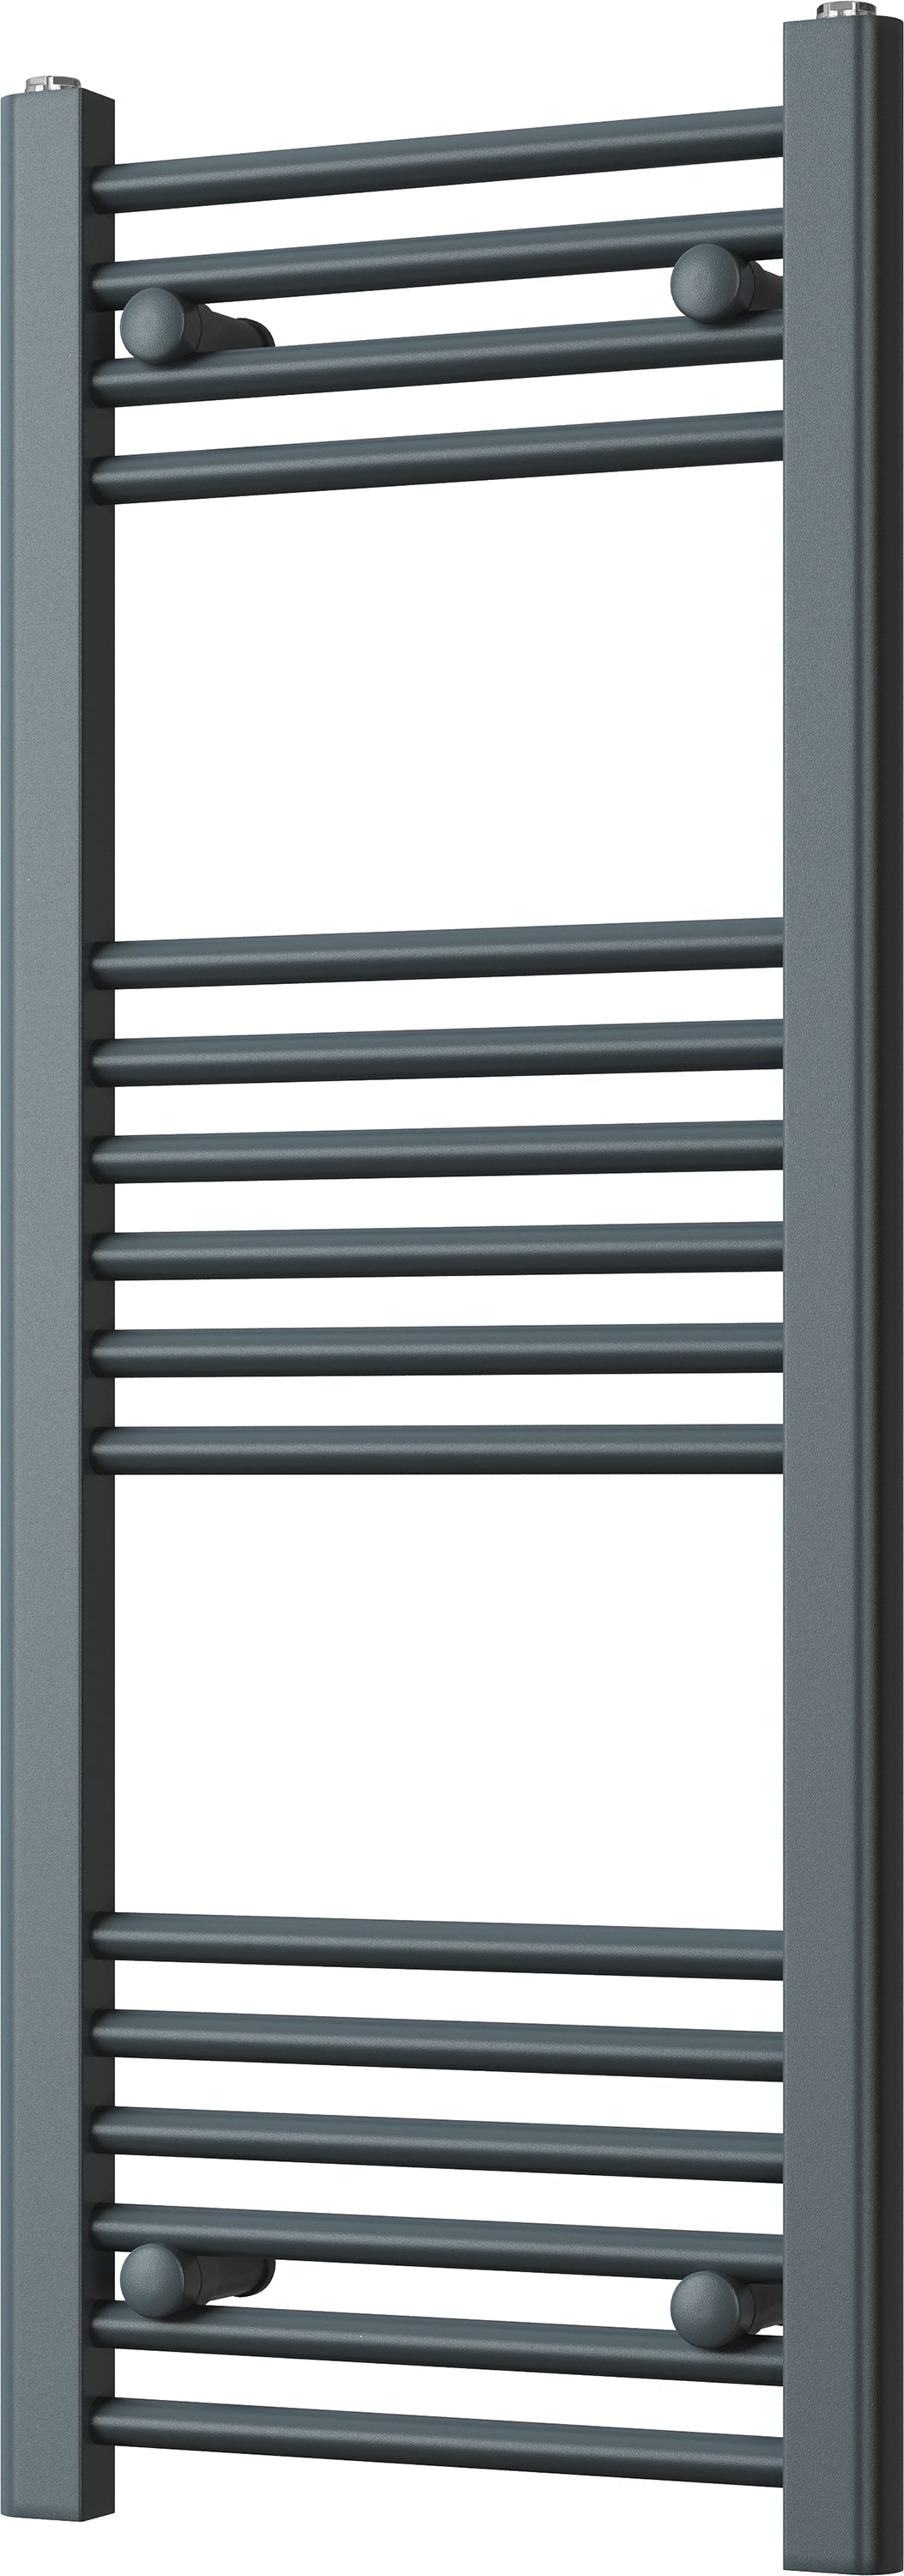 Zennor - Anthracite Heated Towel Rail - H1000mm x W400mm - Straight